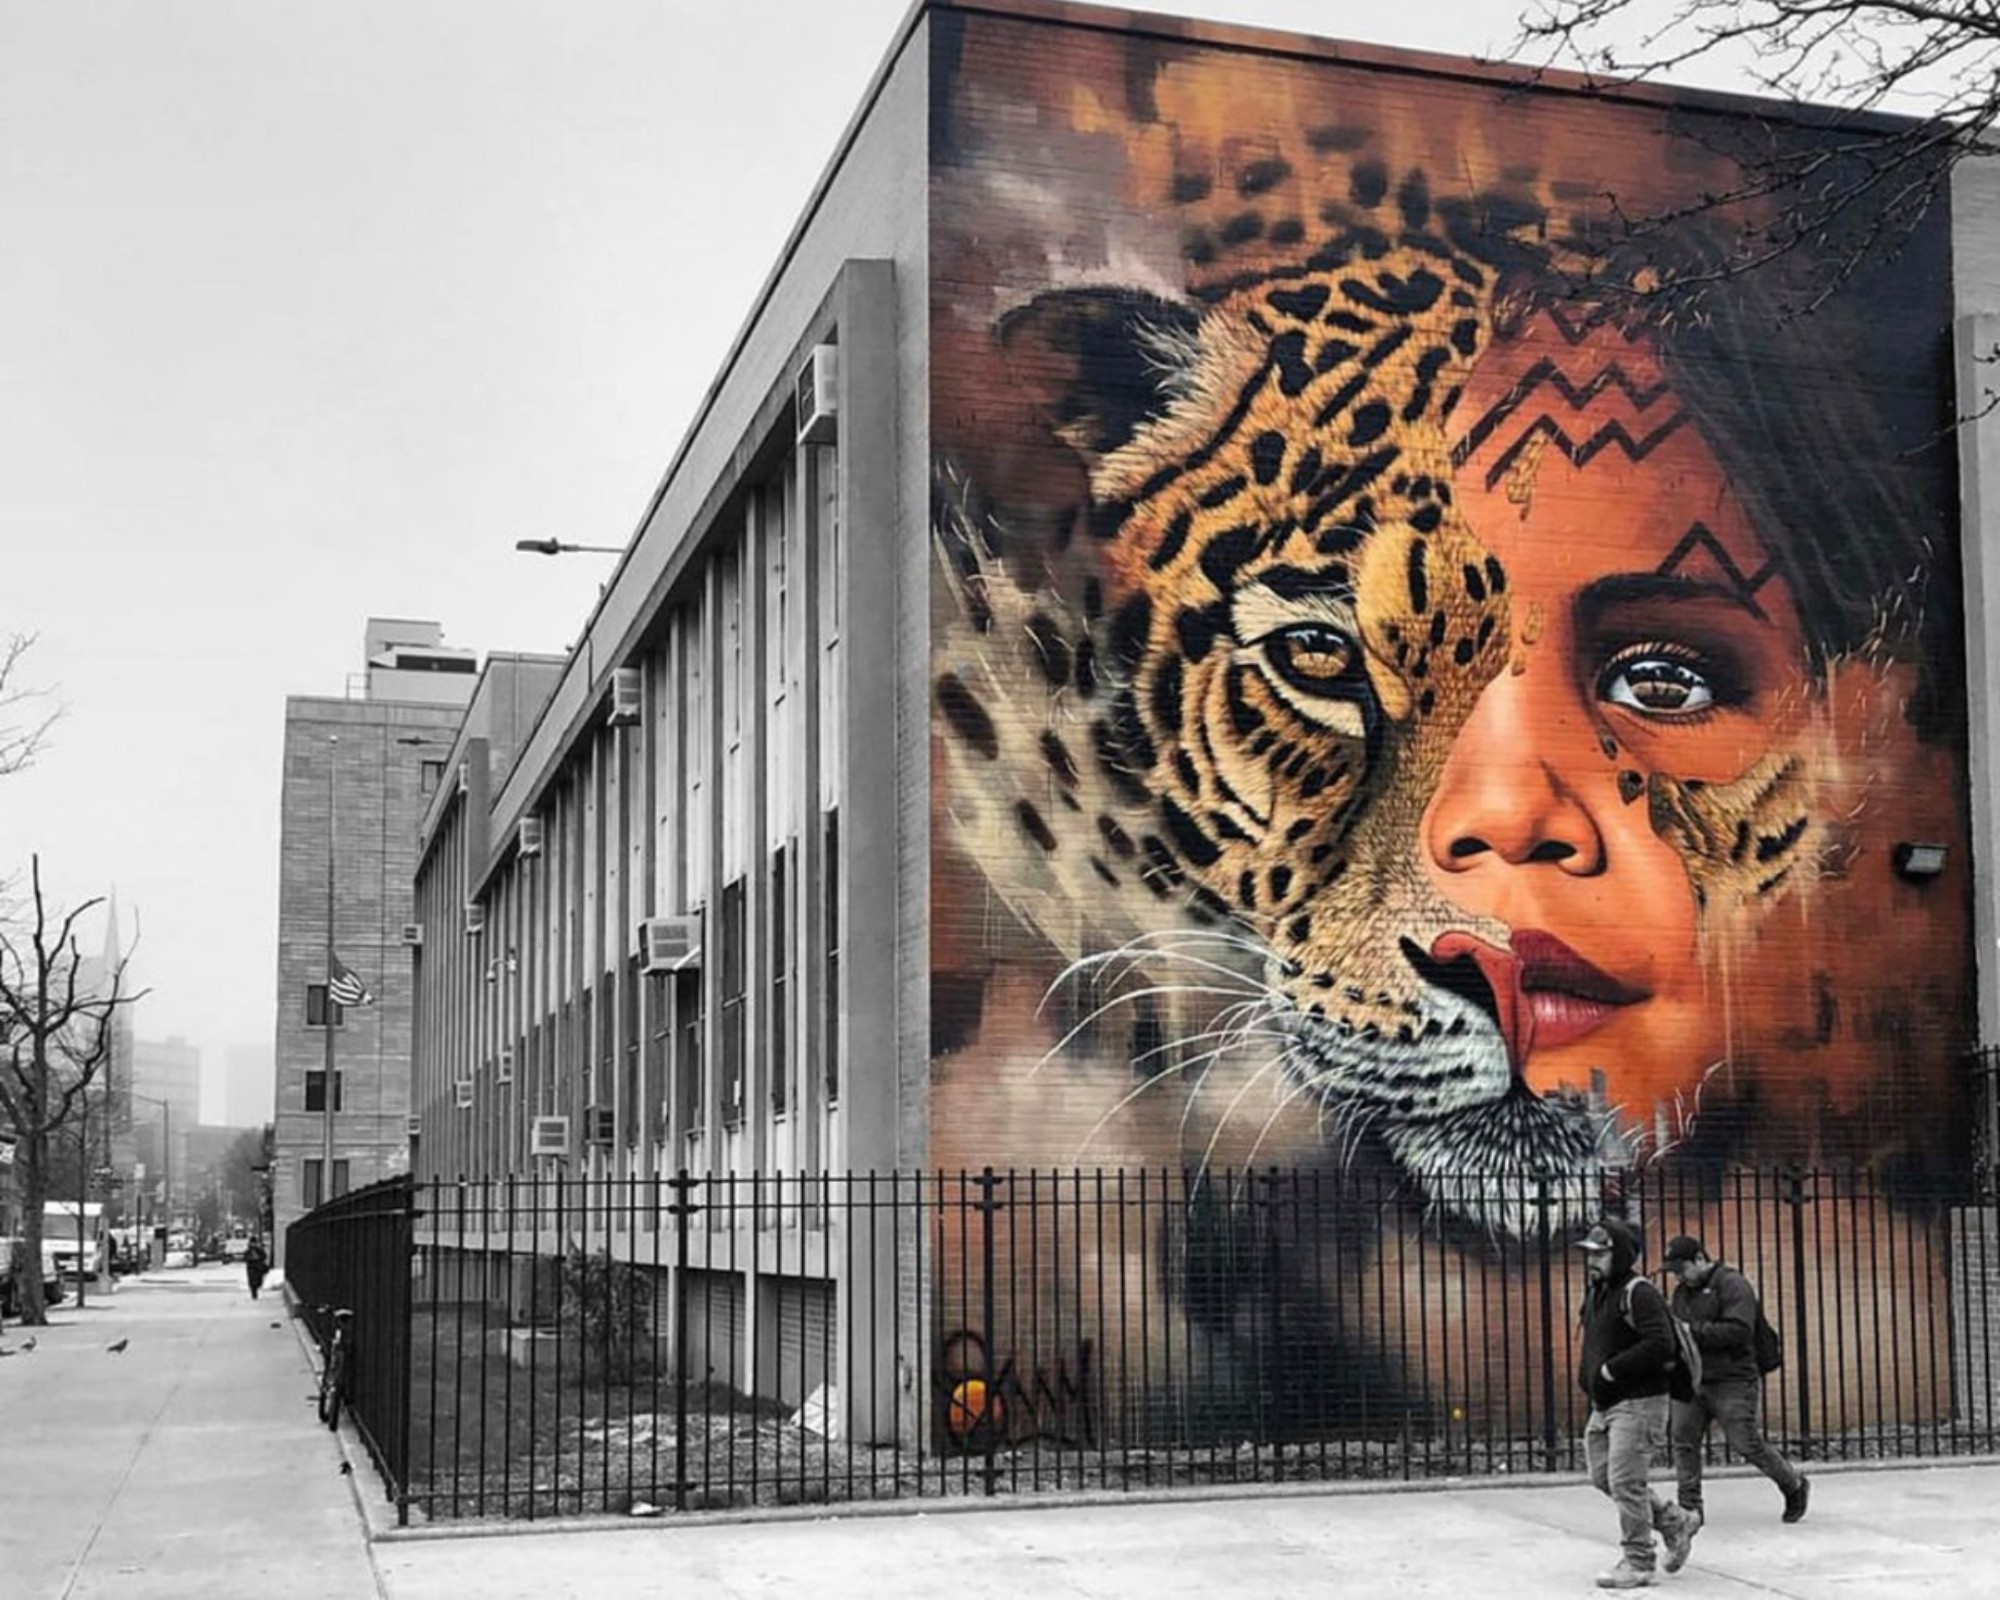 Sonny Street Art Mural of Amazonian Girl and Jaguar Face Painted in Williamsburg, Brooklyn New York as part of Climate Week 2018 in partnership with UNICEF and Greenpoint Innovations